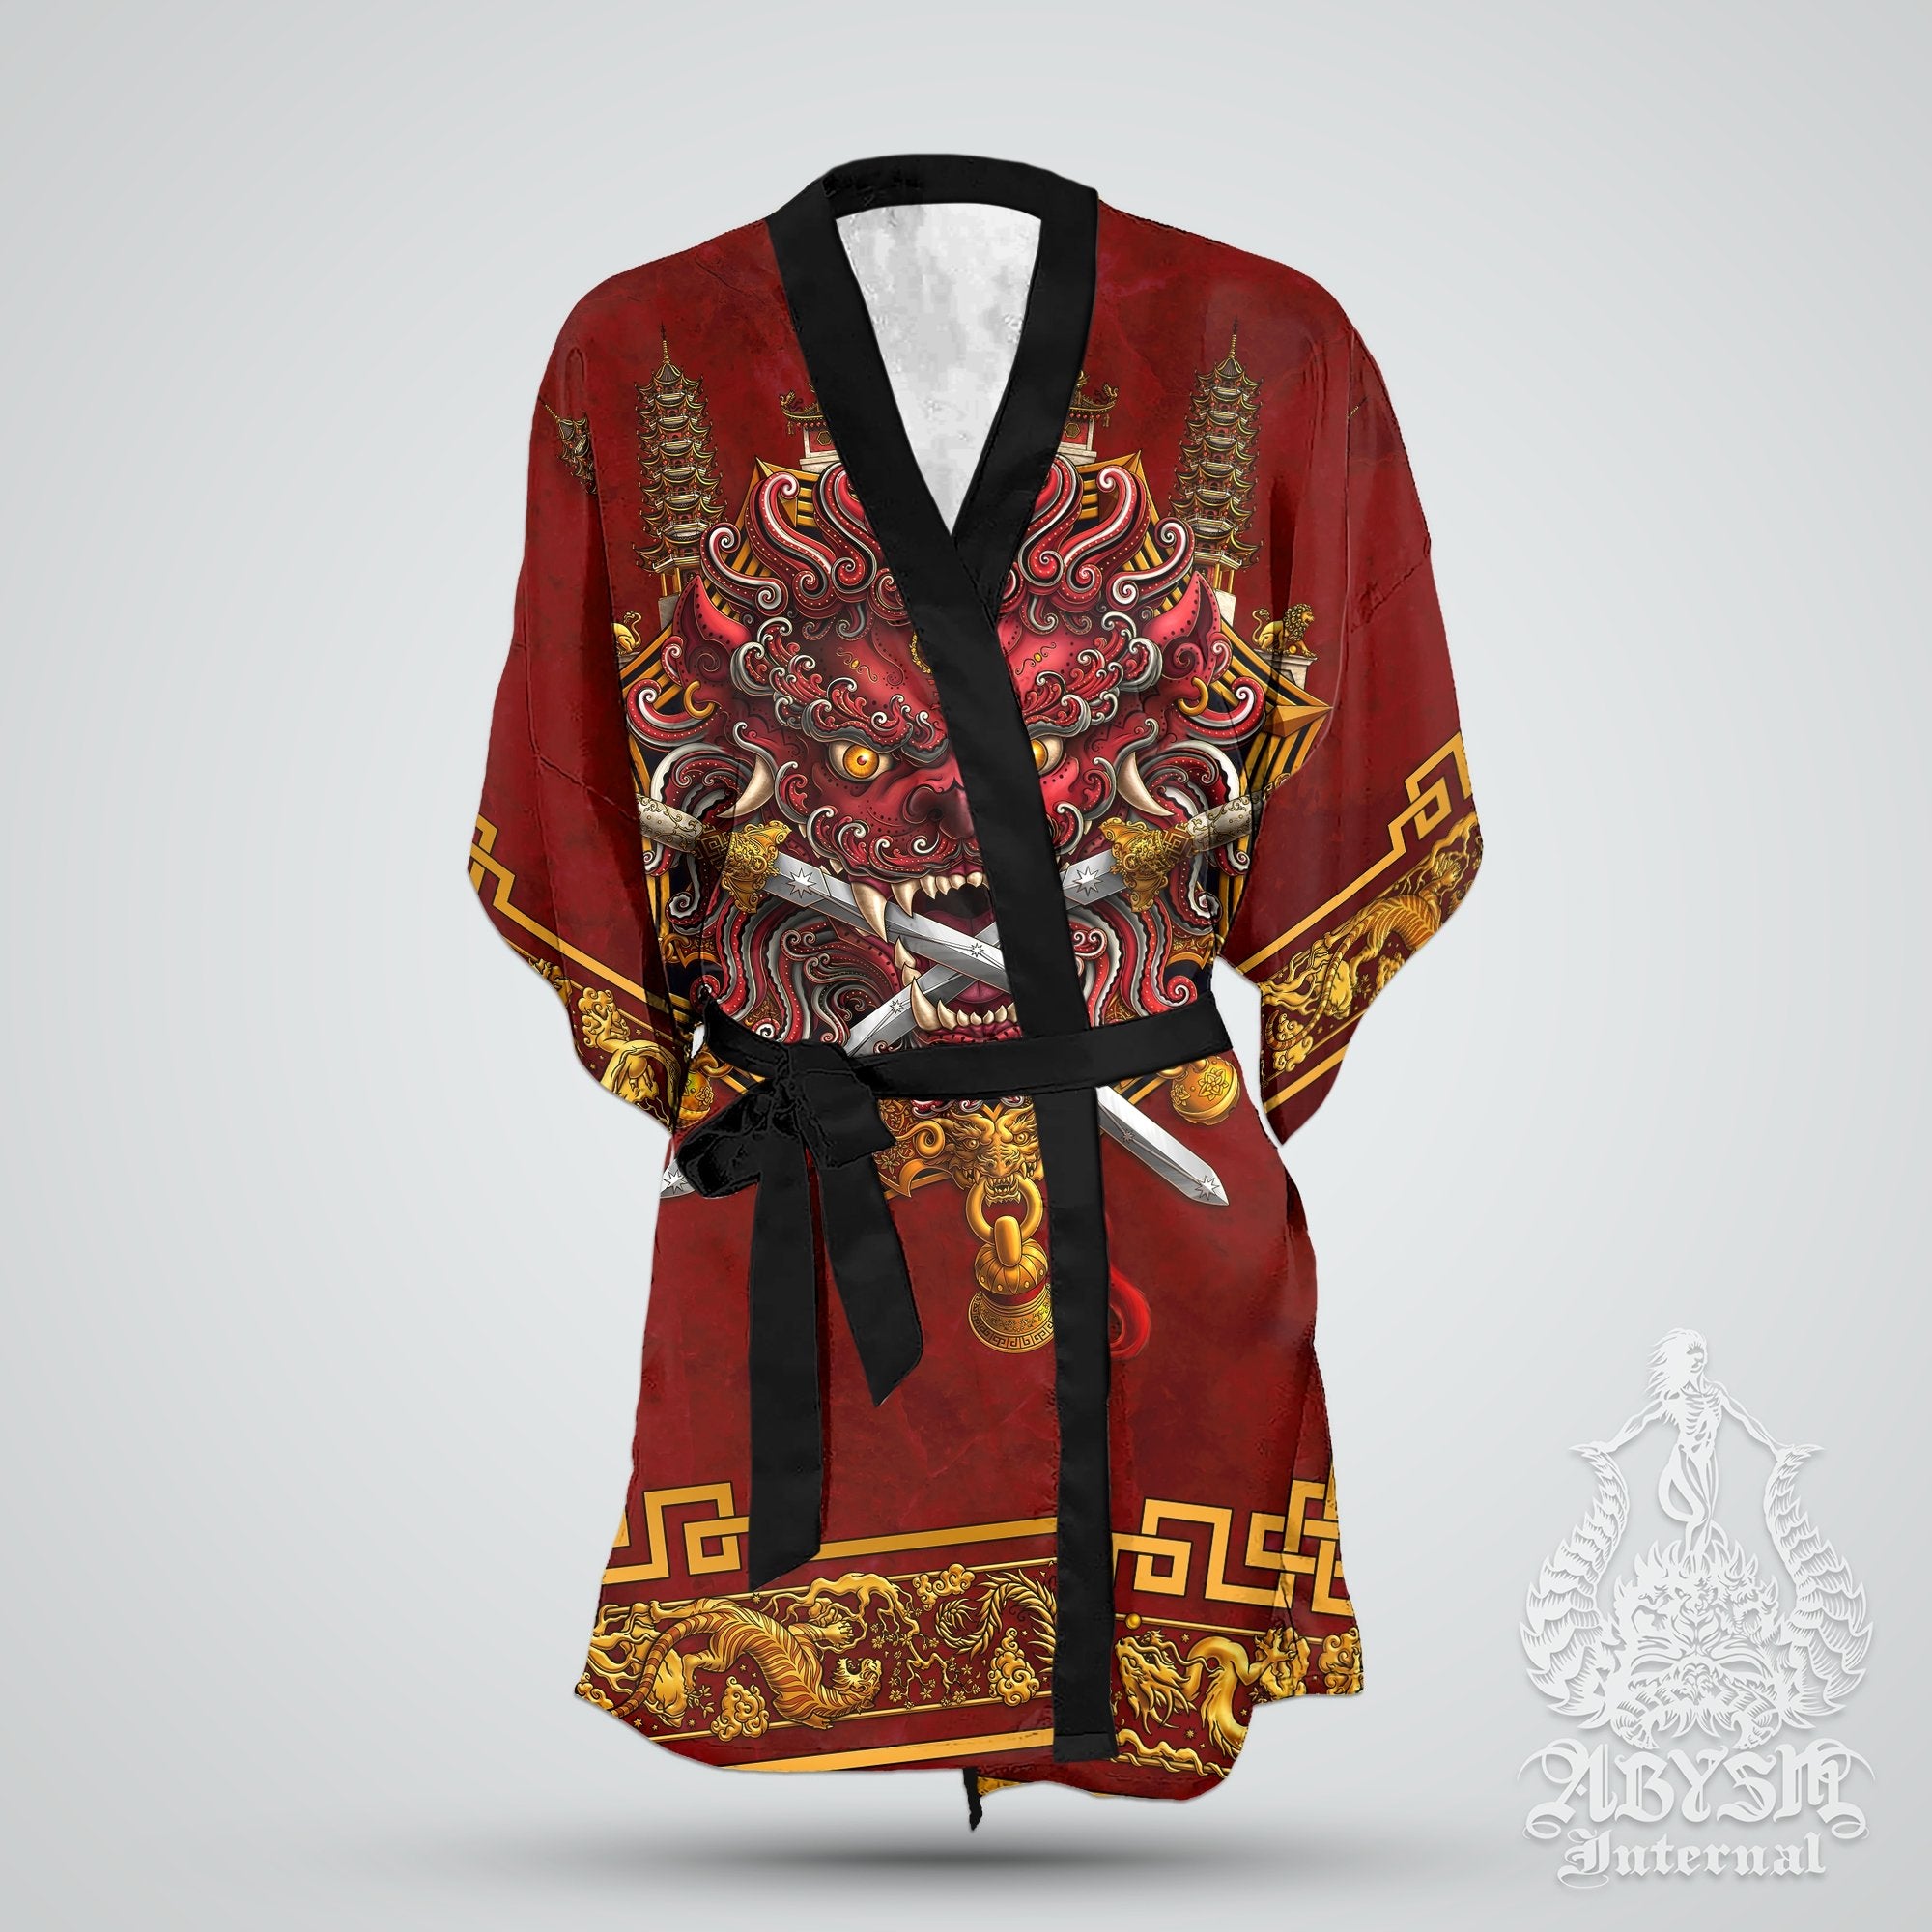 Sword Lion Cover Up, Beach Outfit, Chinese Party Kimono, Taiwan Summer Festival Robe, Asian Indie and Alternative Clothing, Unisex - Red - Abysm Internal